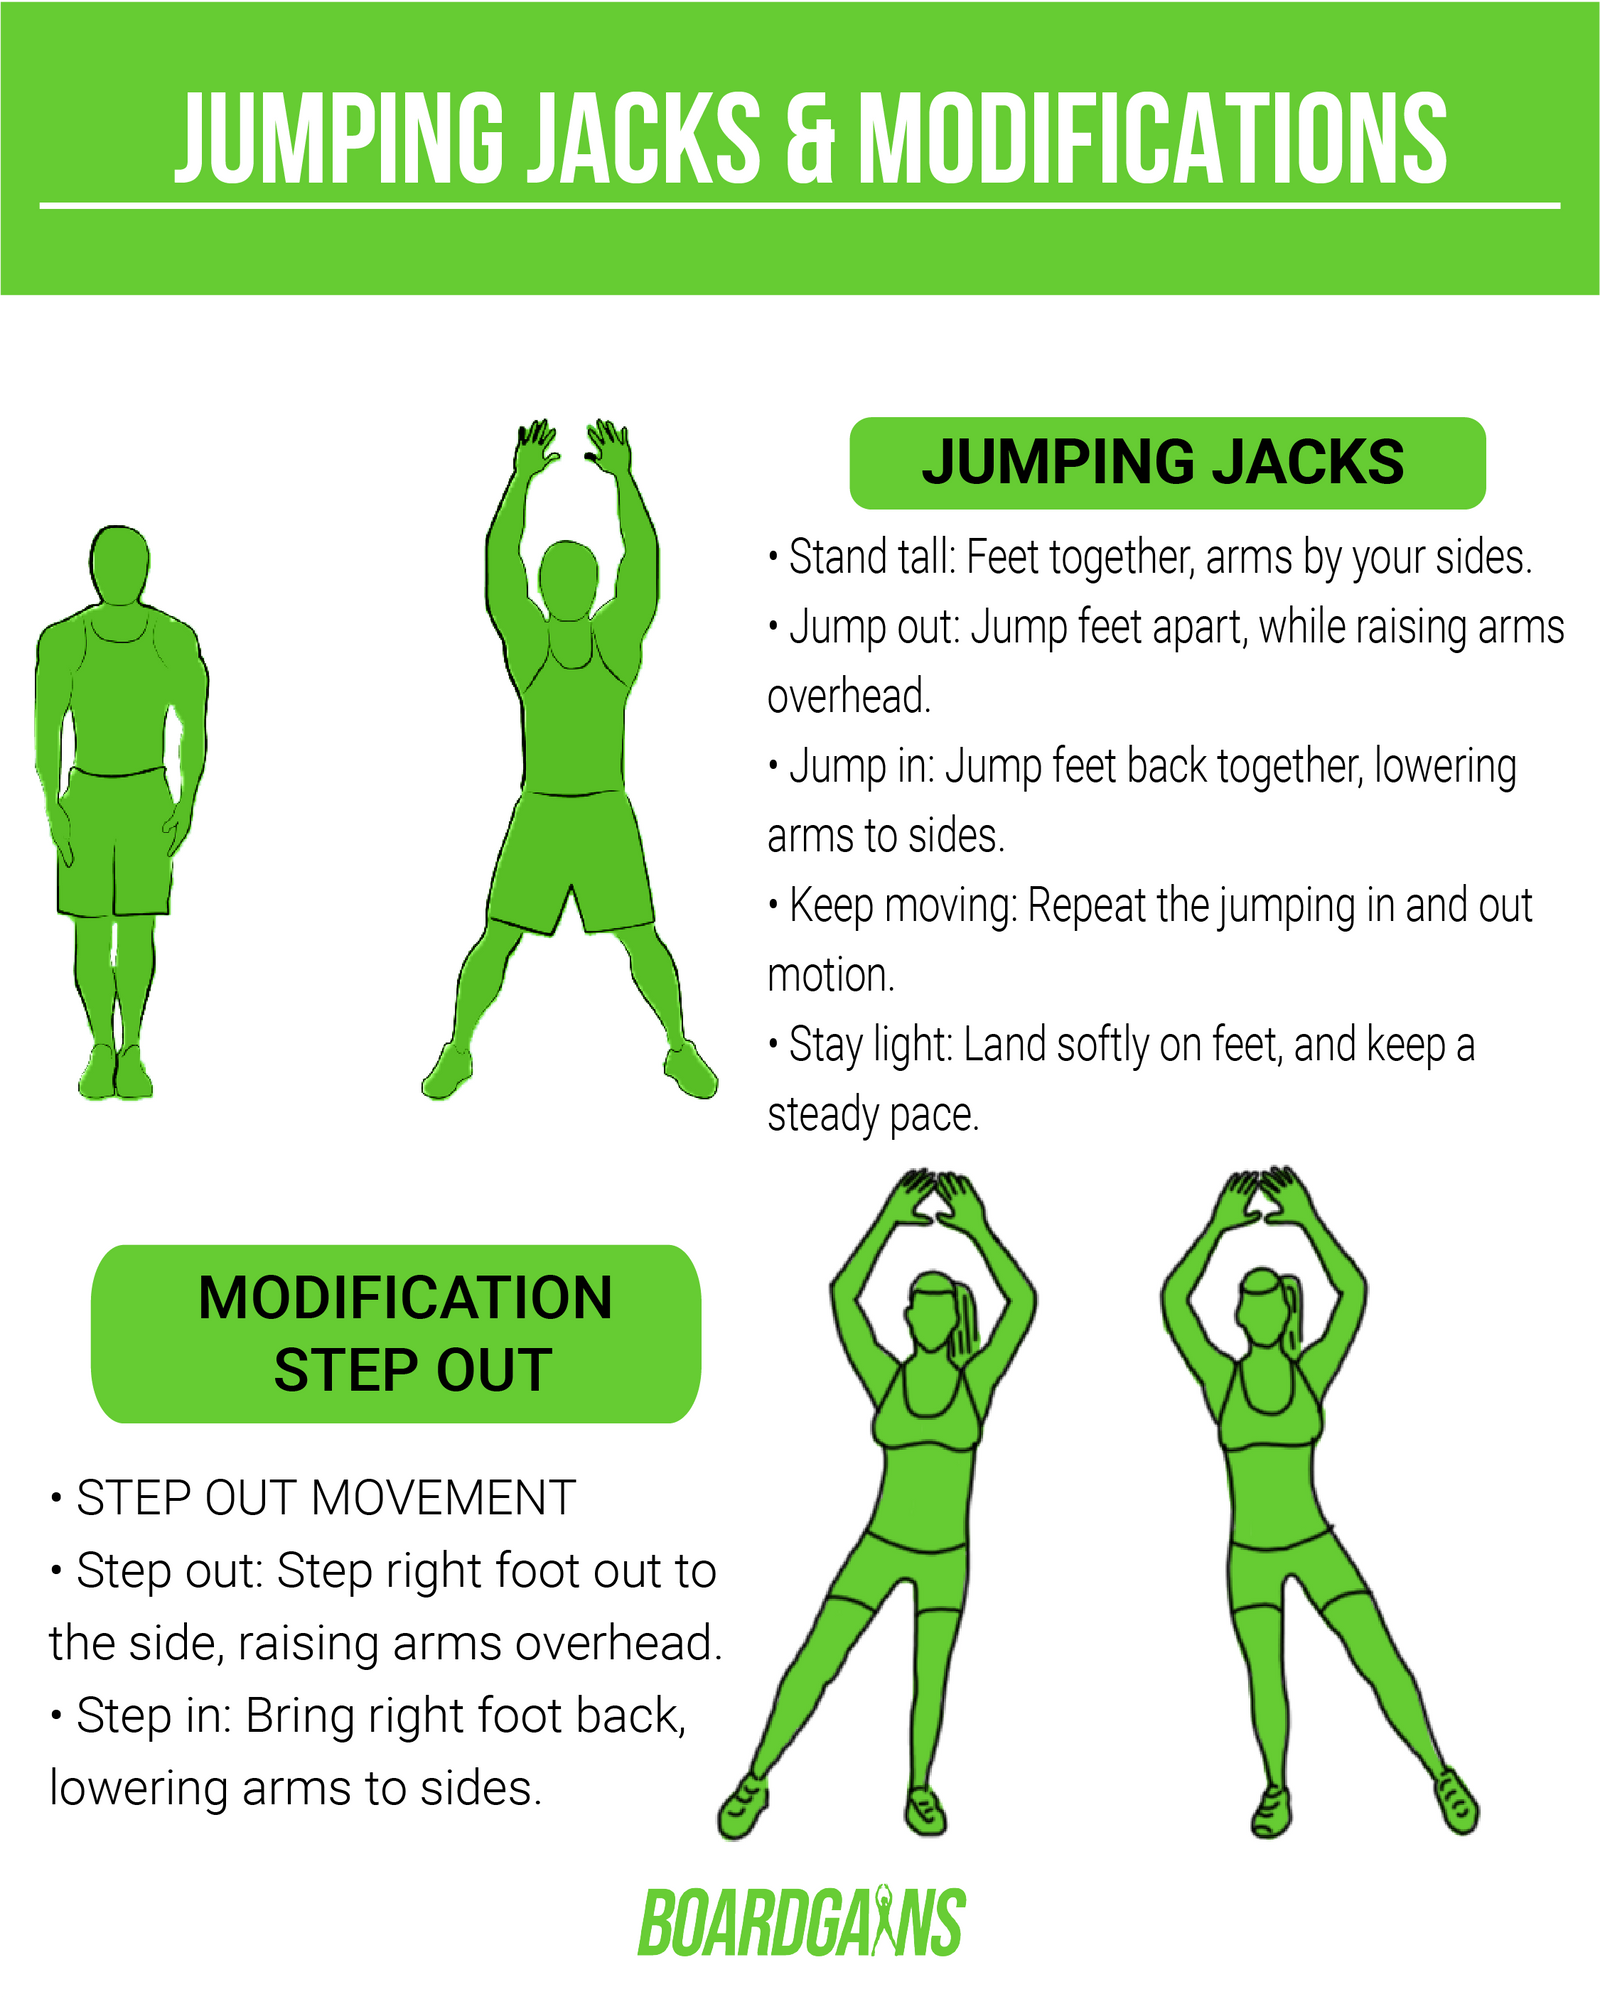 Jumping Jack Variations for Any Fitness Goal and Need